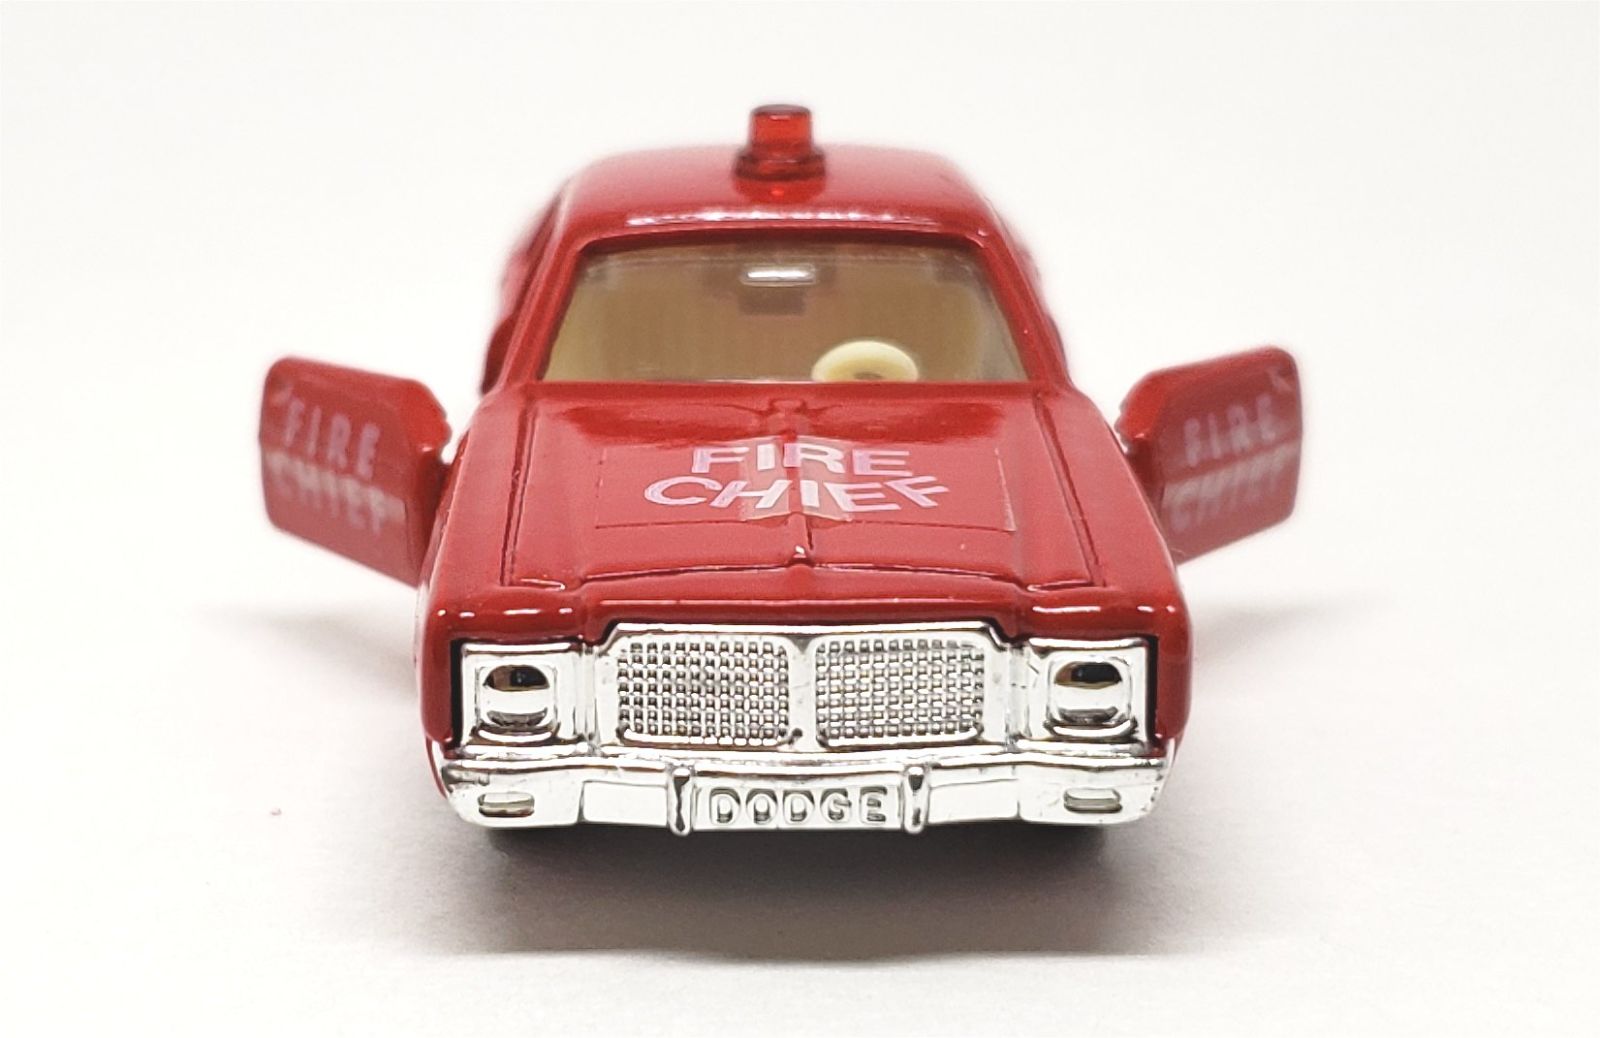 Illustration for article titled [REVIEW] Tomica Dodge Coronet Fire Chief Car